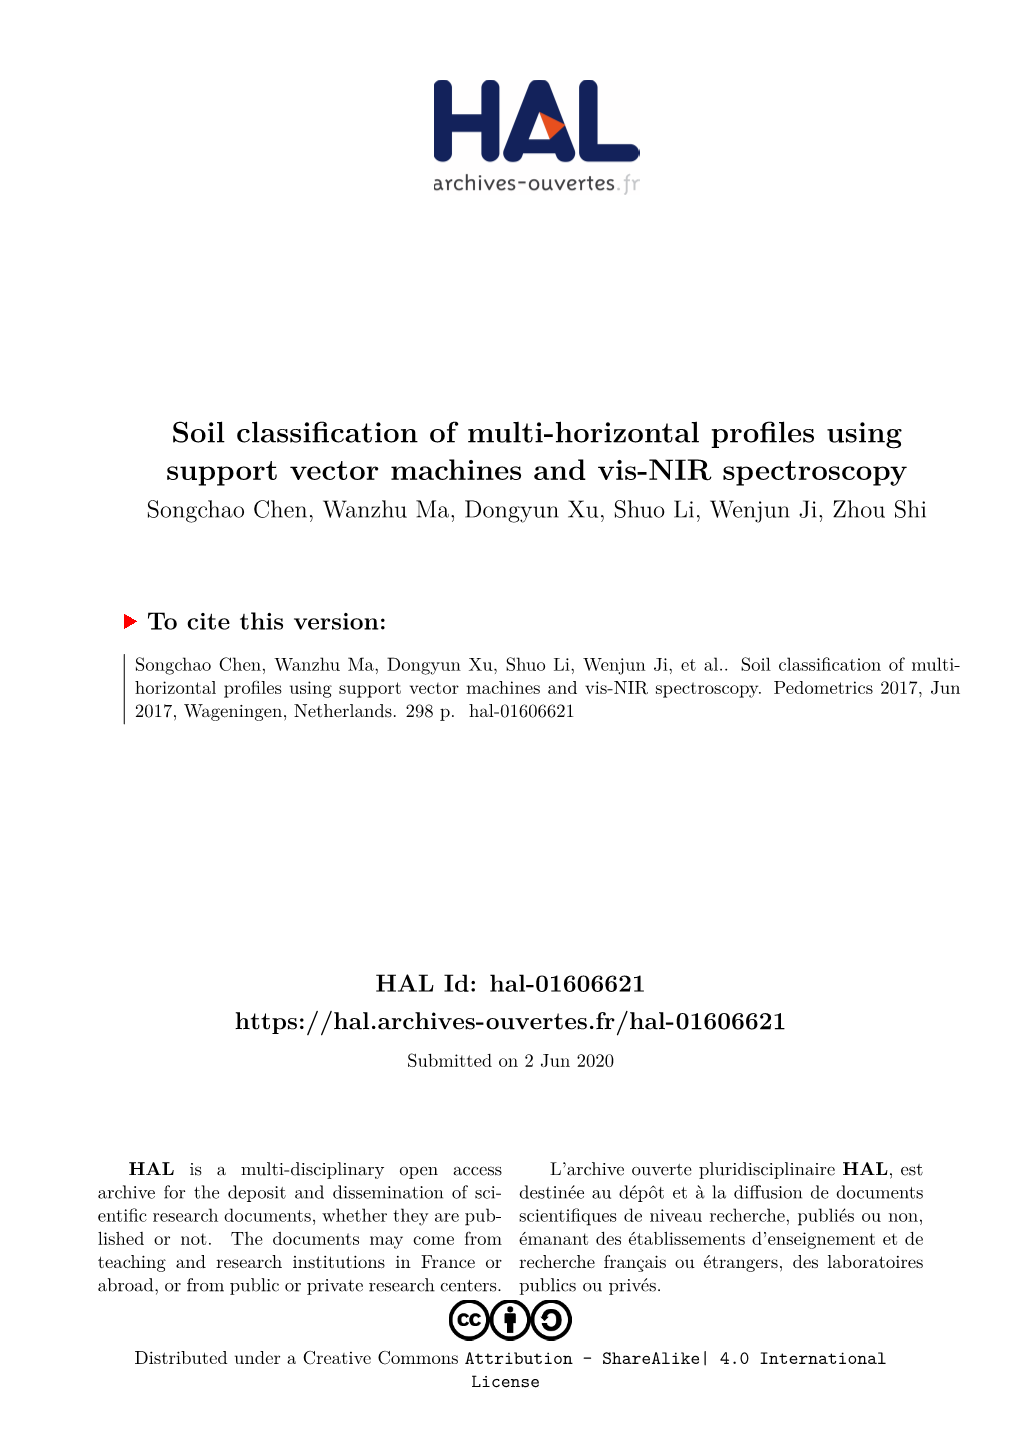 Soil Classification of Multi-Horizontal Profiles Using Support Vector